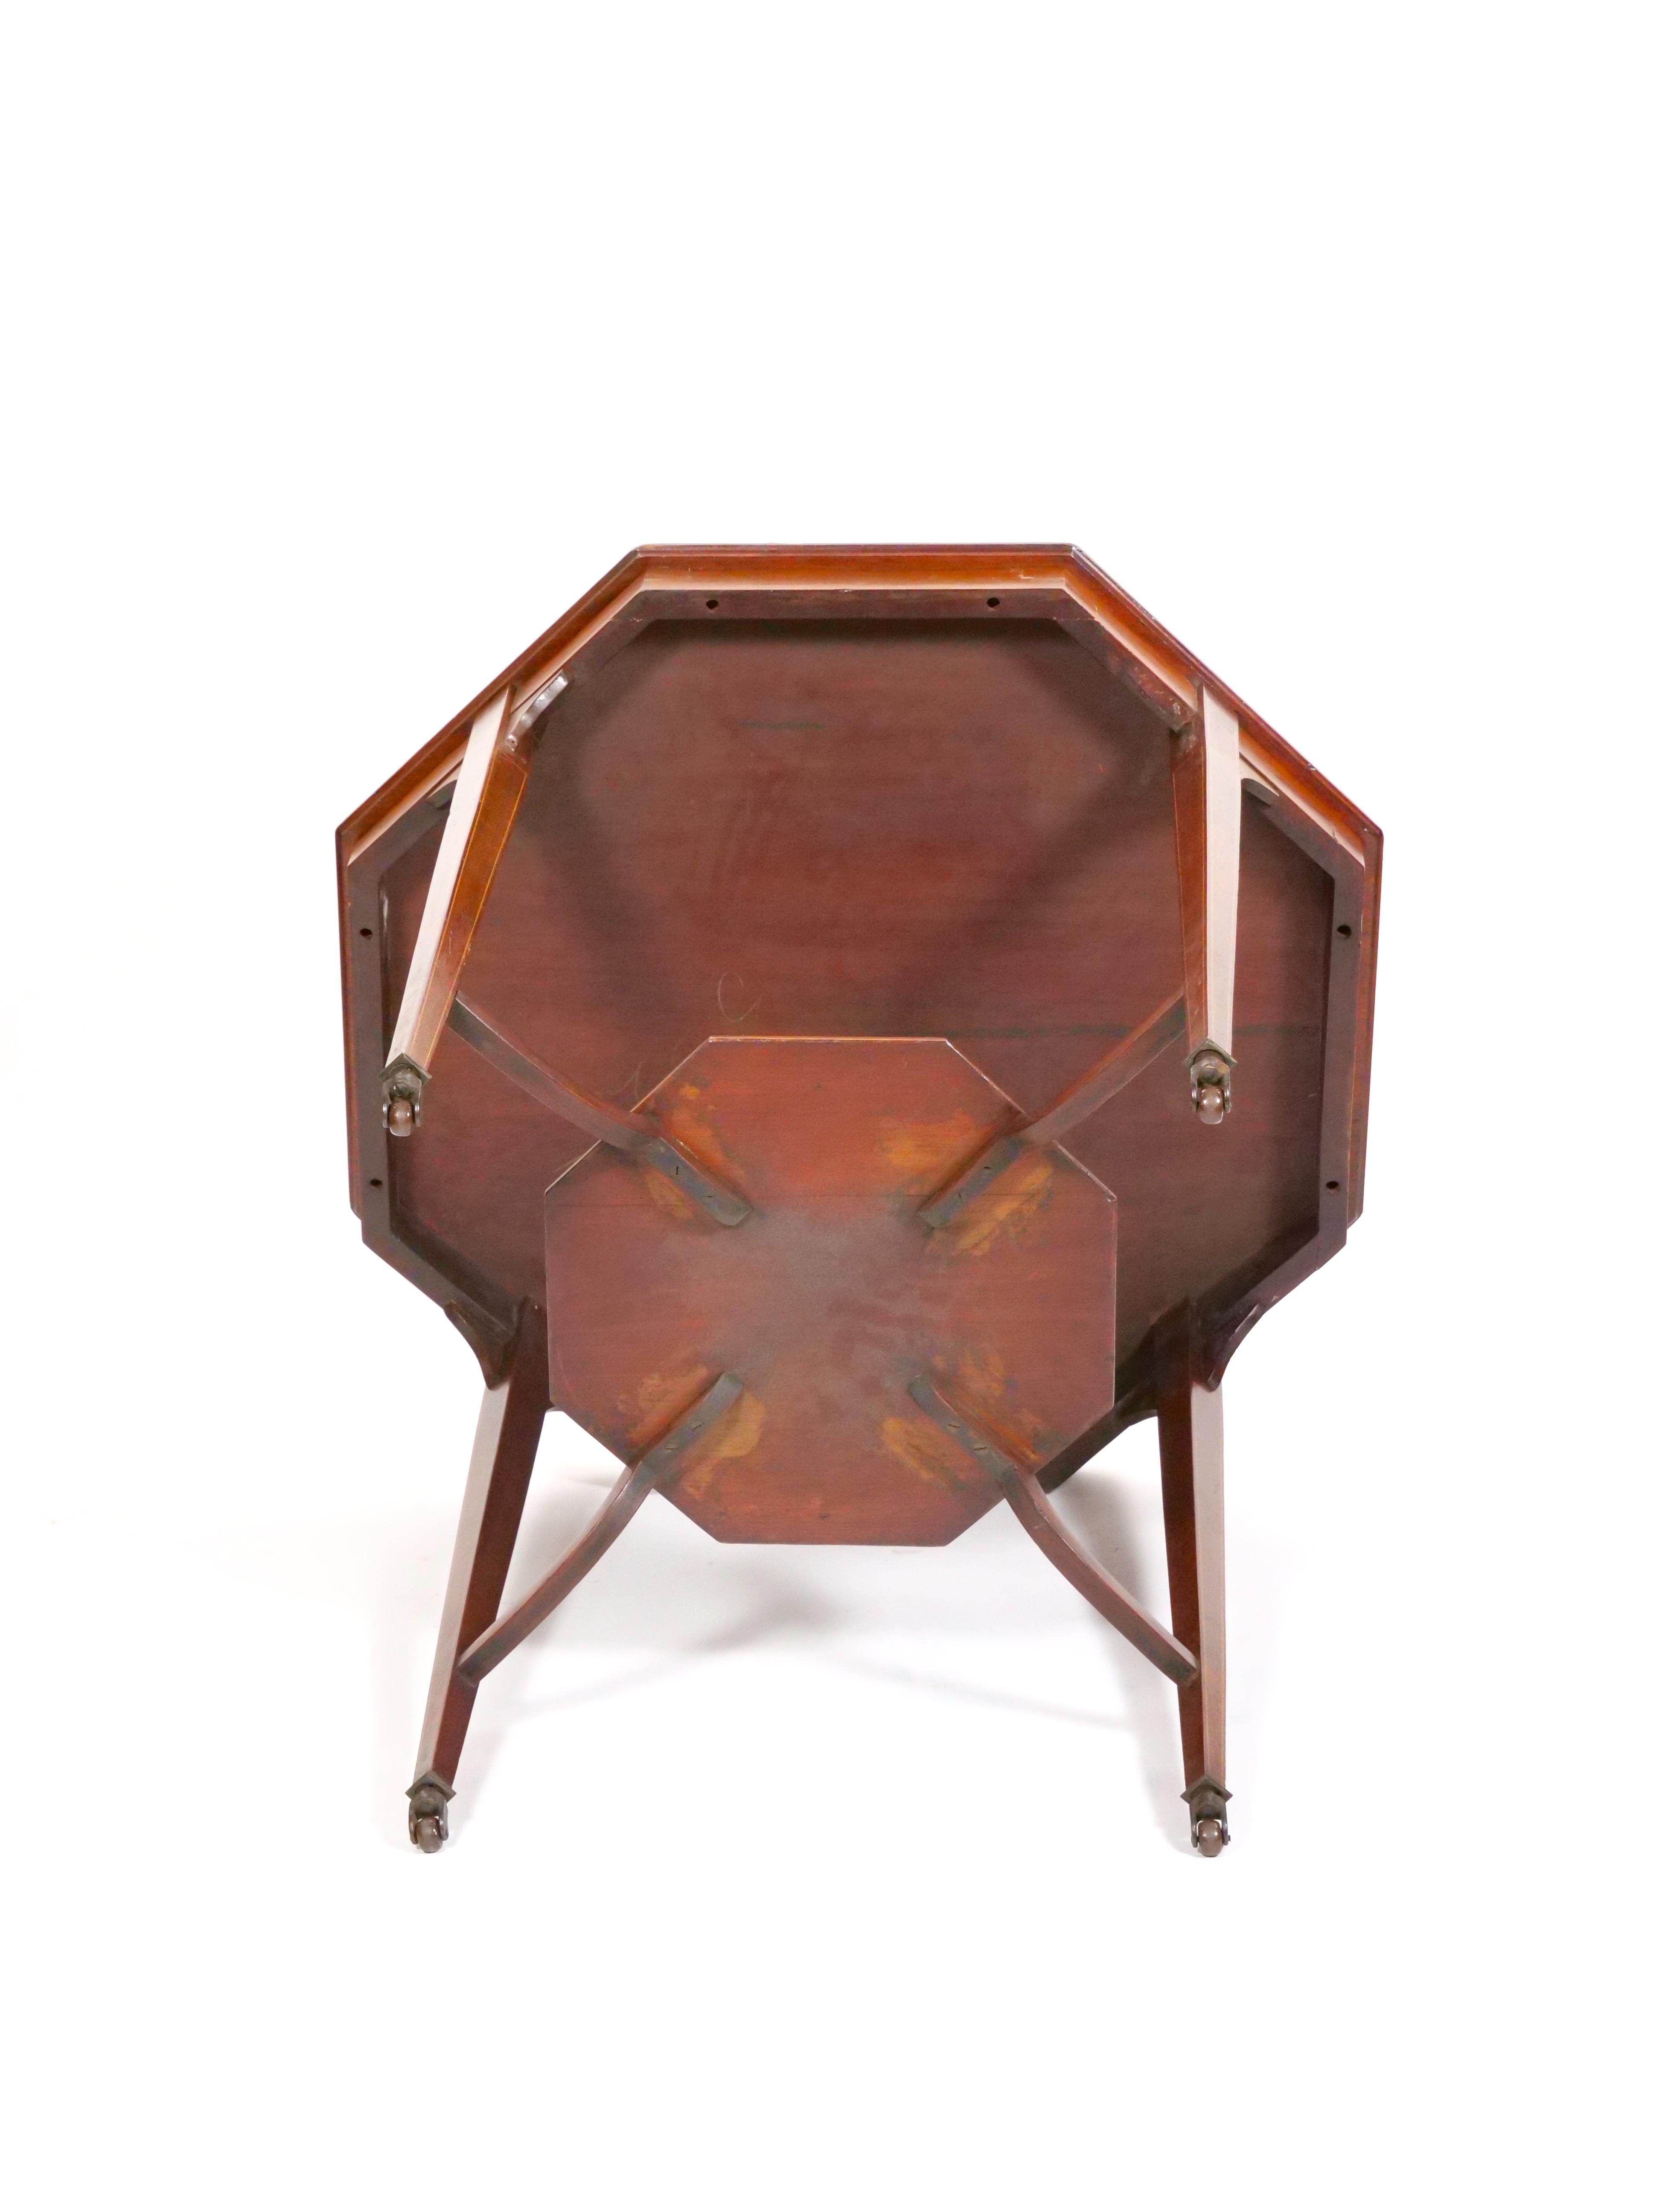 English Burl Mahogany Hexagonal Shape Inlay Decorated Top Center Table For Sale 8